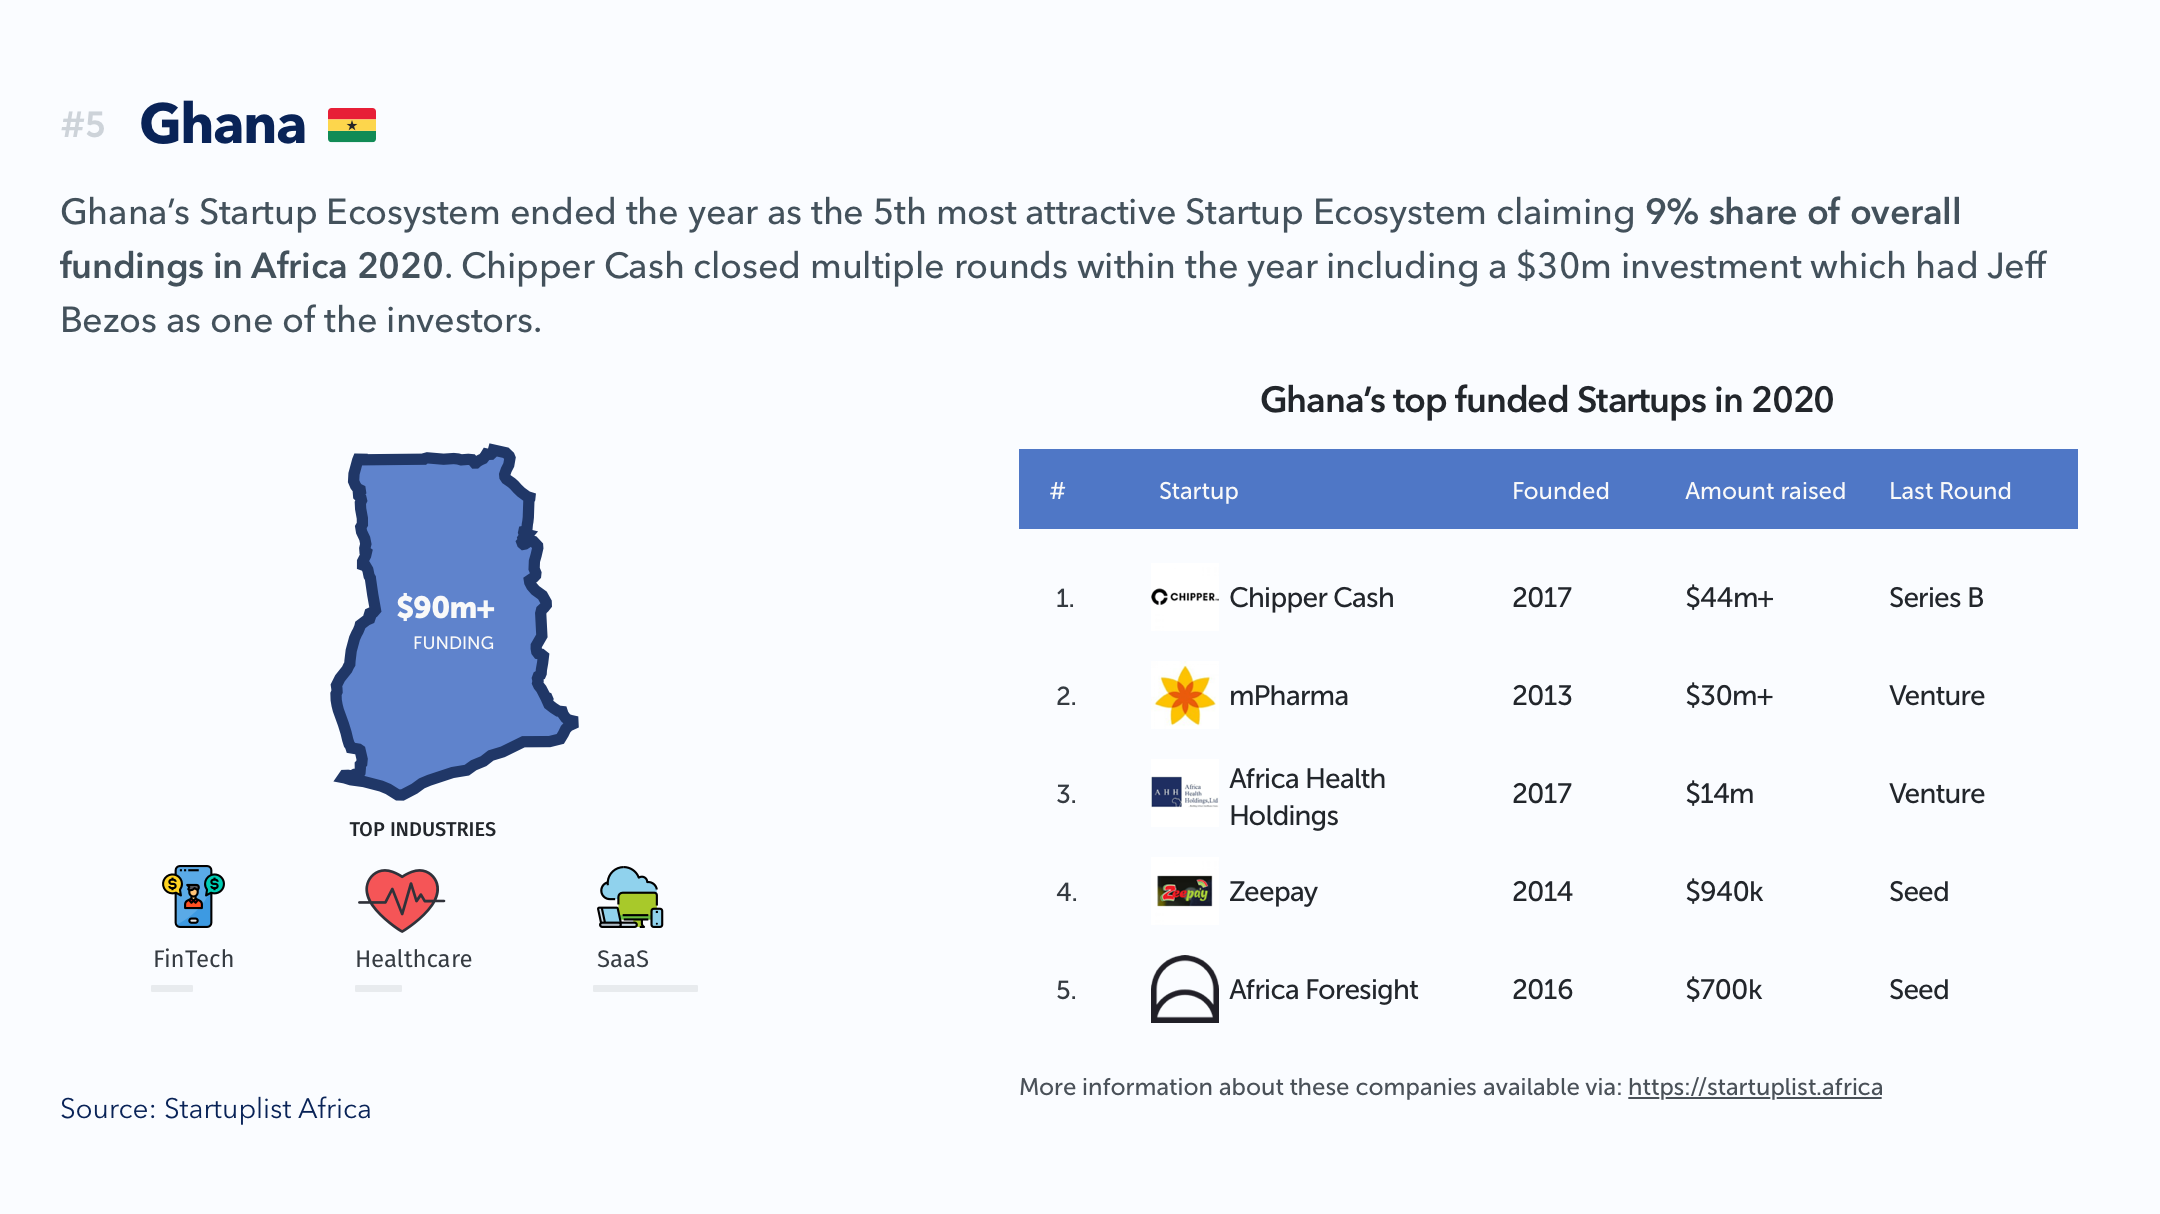 Ghana report by Startuplist Africa, a data-driven platform that provides insights to the African Startup Ecosystem